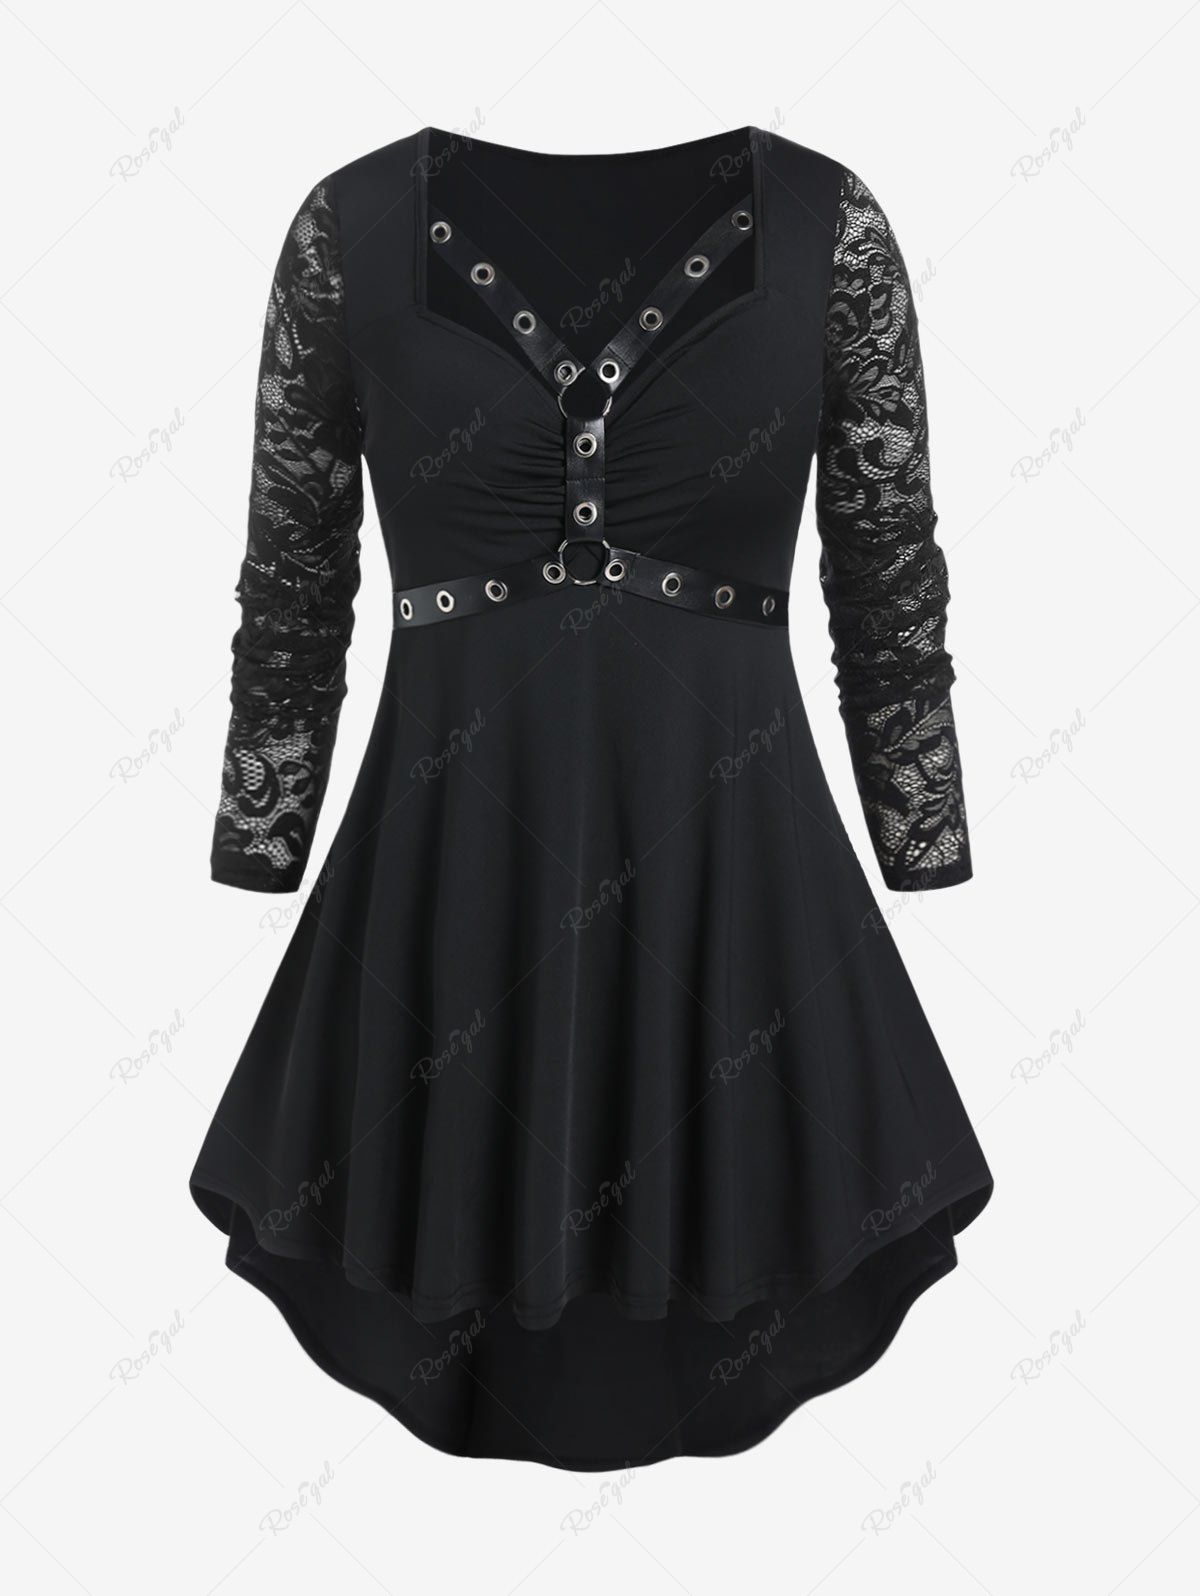 Discount Gothic Lace Sleeve Harness Grommets High Low Tee  